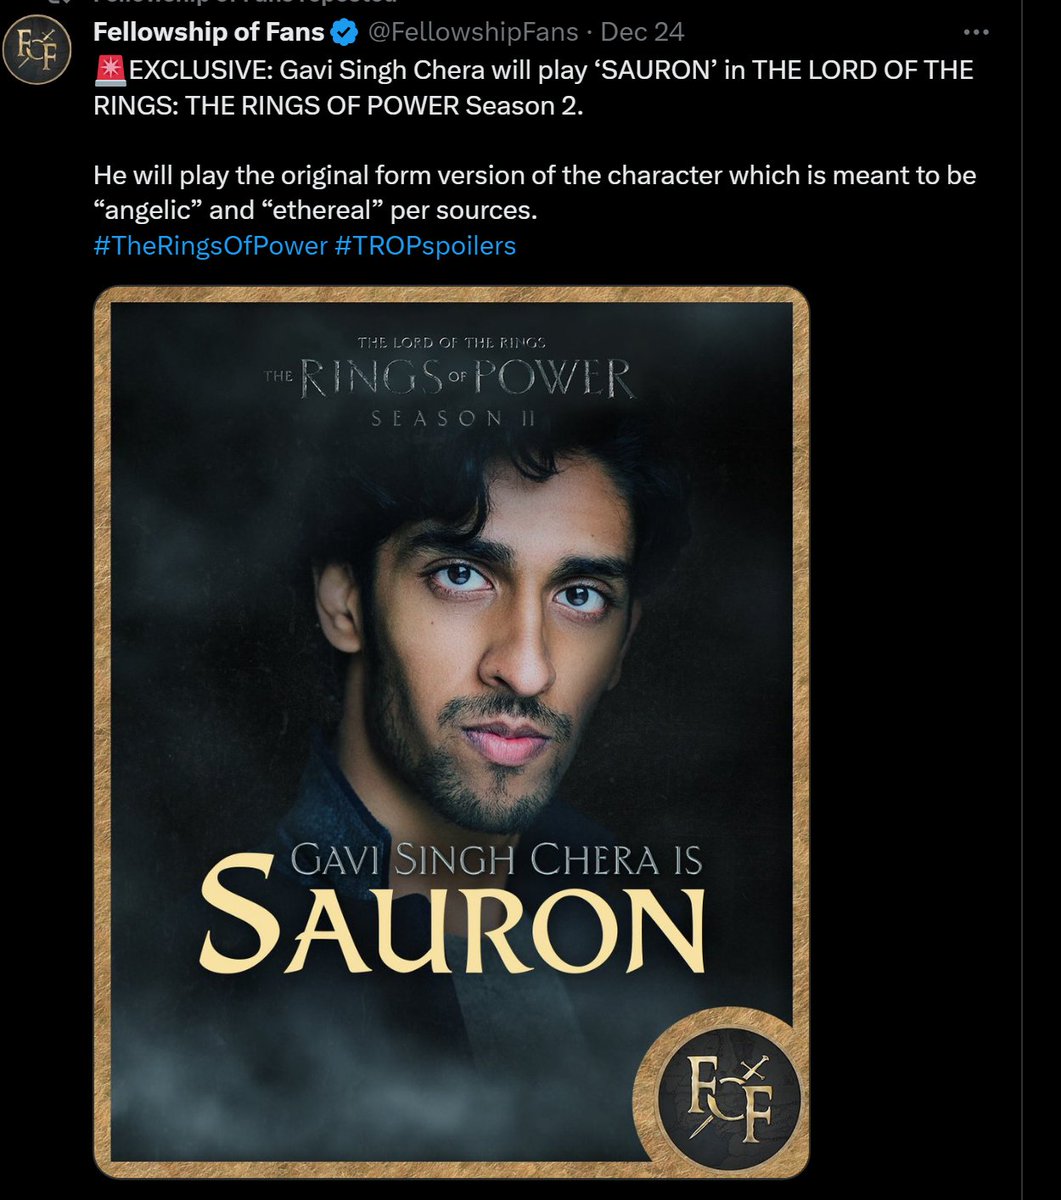 CONGRATULATIONS world! 
Racism has been conquered with Amazon casting a Sauron of Color
#RingsOfPower